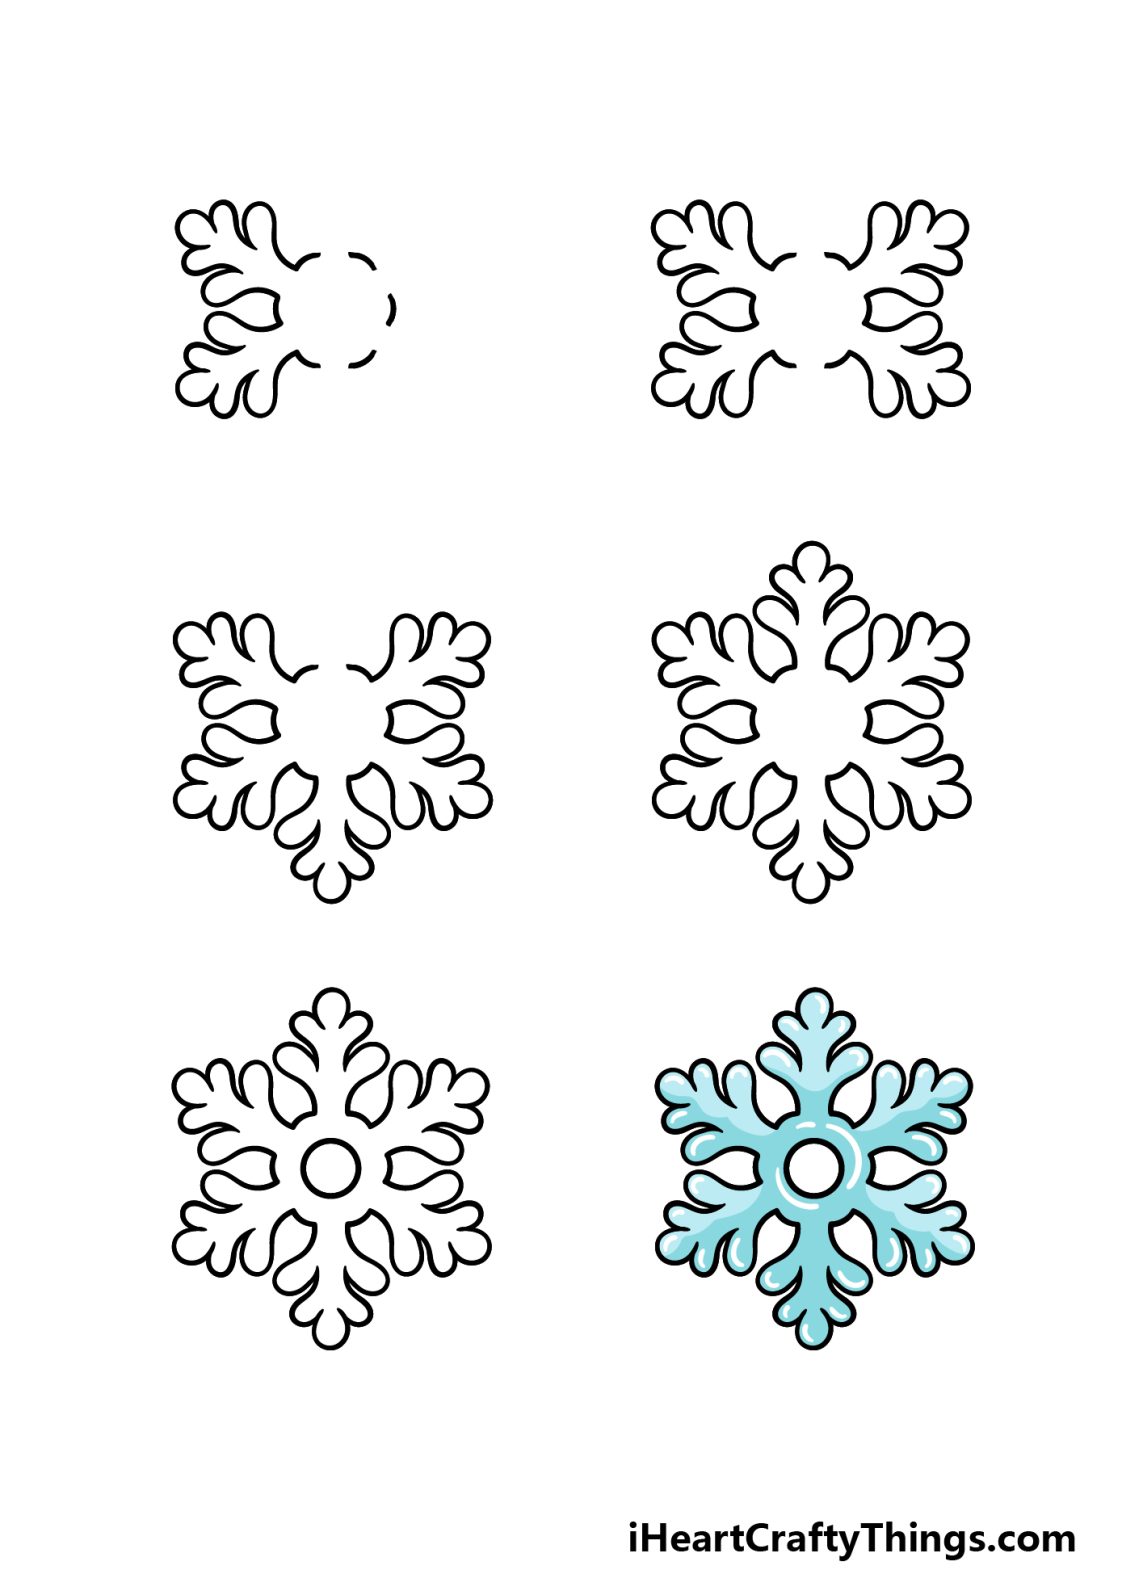 Cartoon Snowflake Drawing How To Draw A Cartoon Snowflake Step By Step